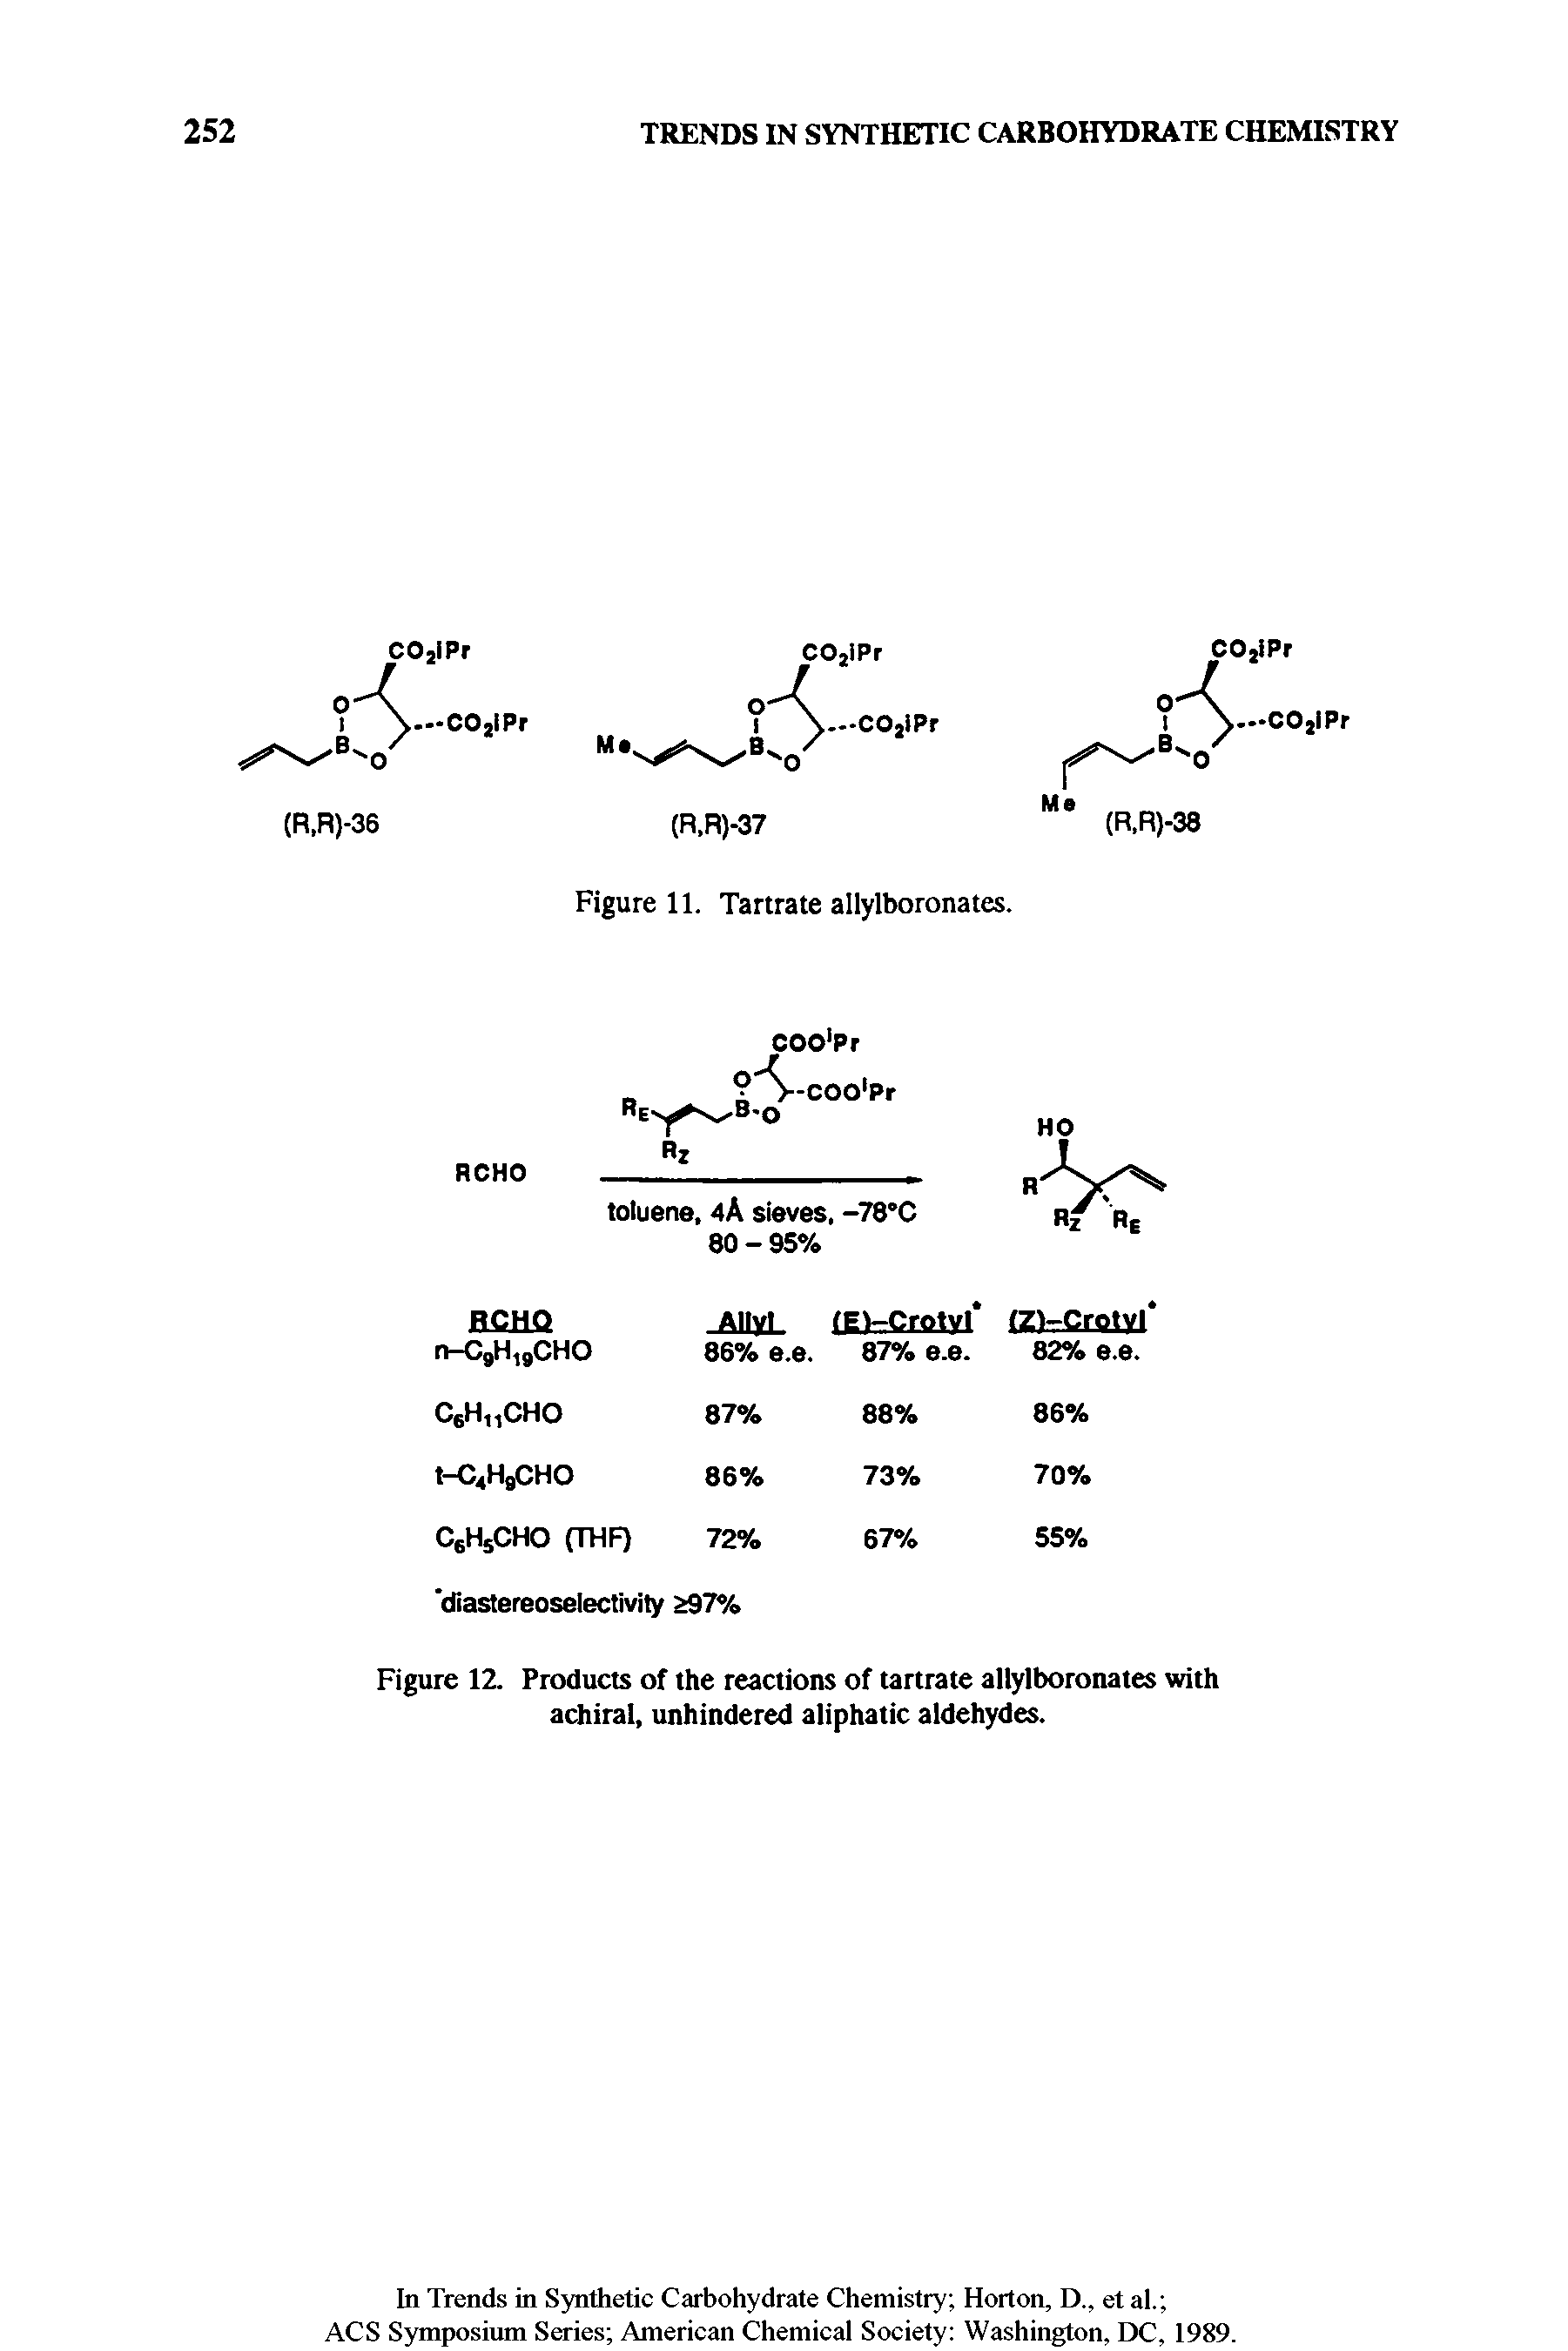 Figure 12. Products of the reactions of tartrate allylboronates with achiral, unhindered aliphatic aldehydes.